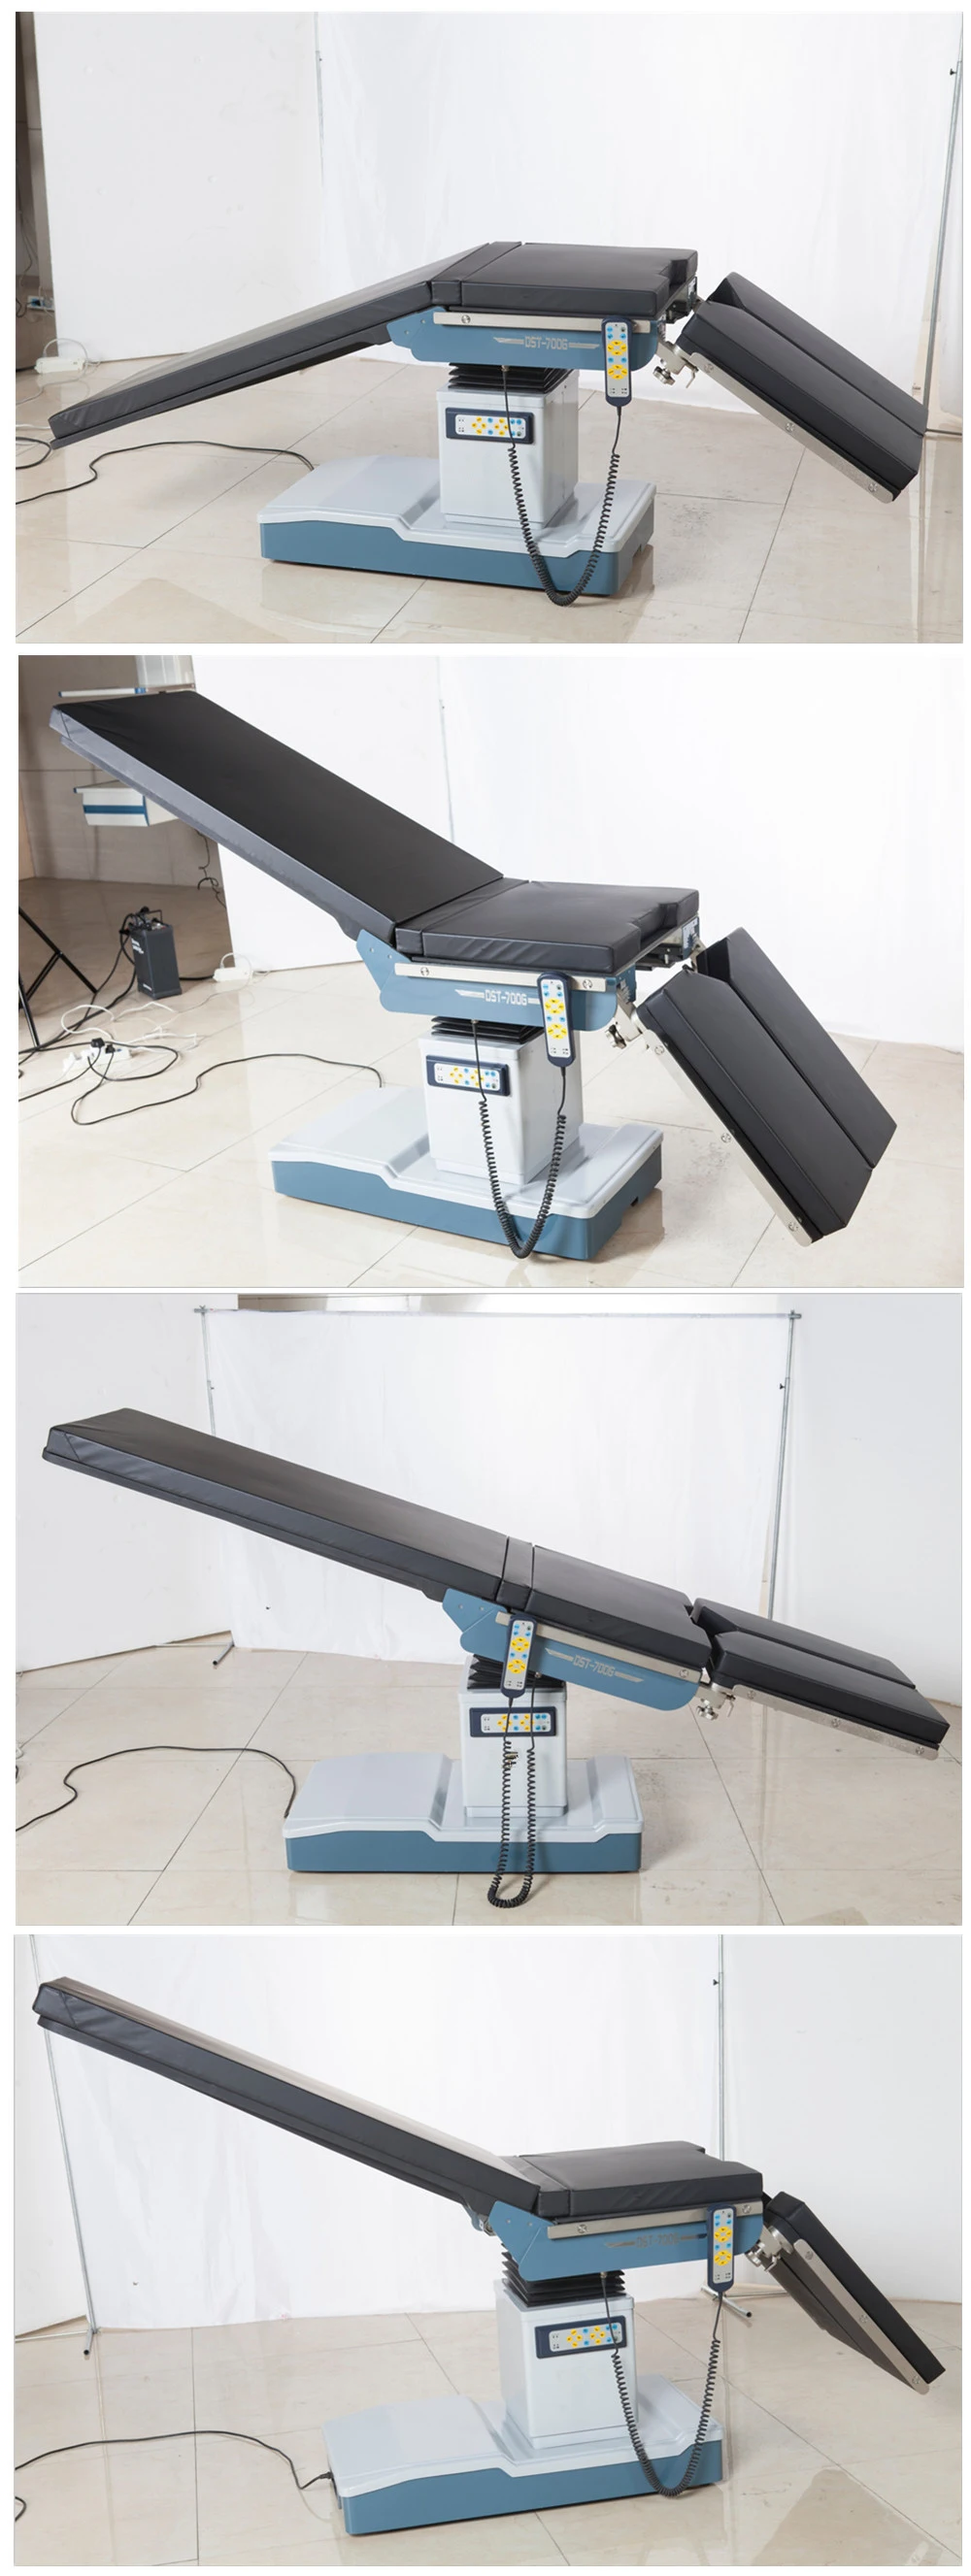 Electric Orthopedics Surgical Operation Bed with C-Arm